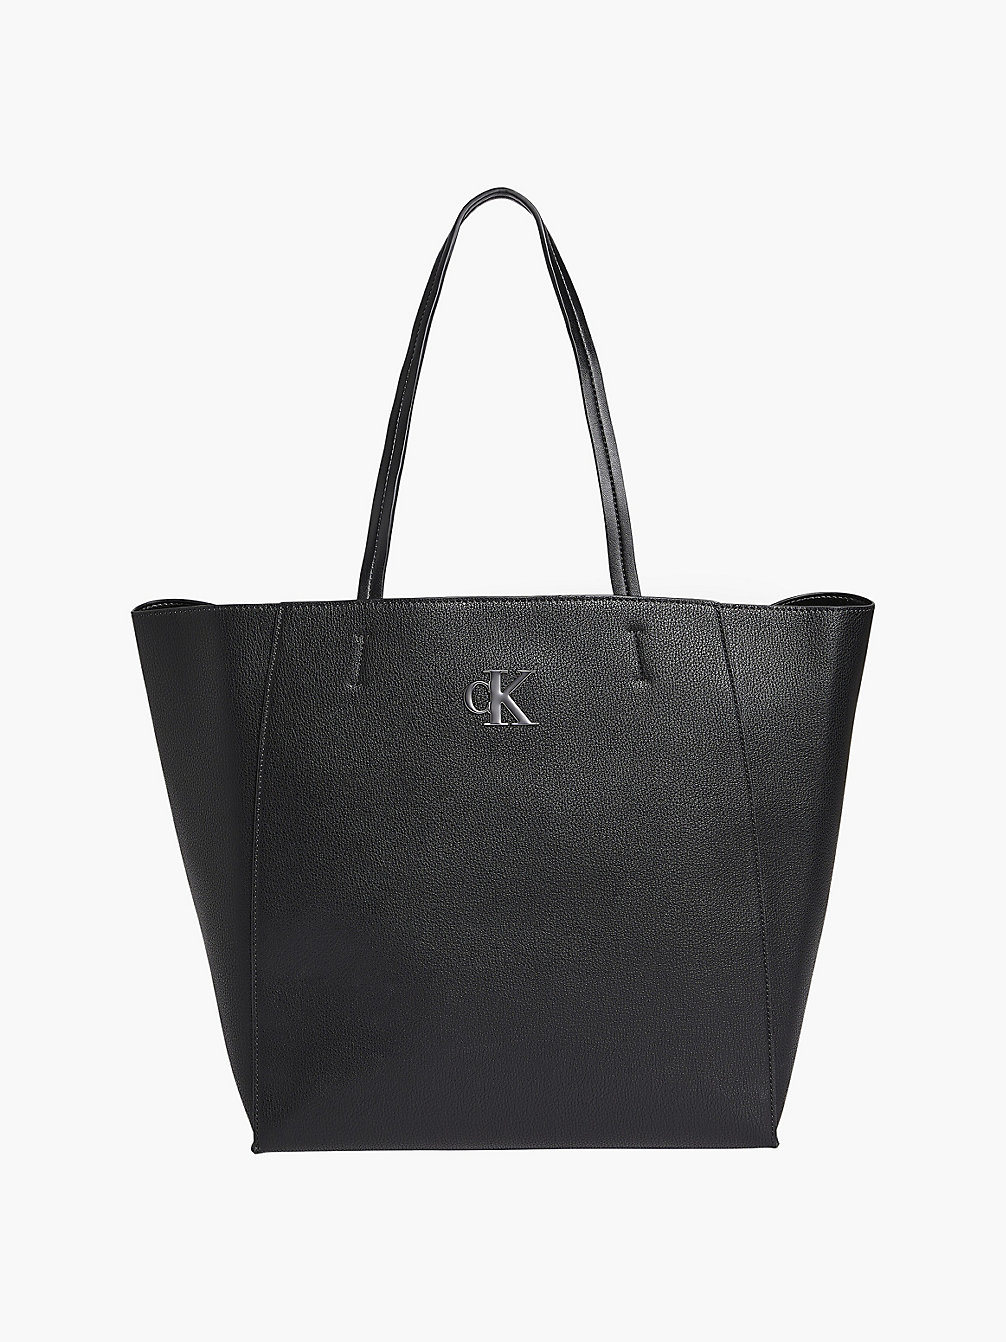 BLACK Recycled Tote Bag undefined women Calvin Klein